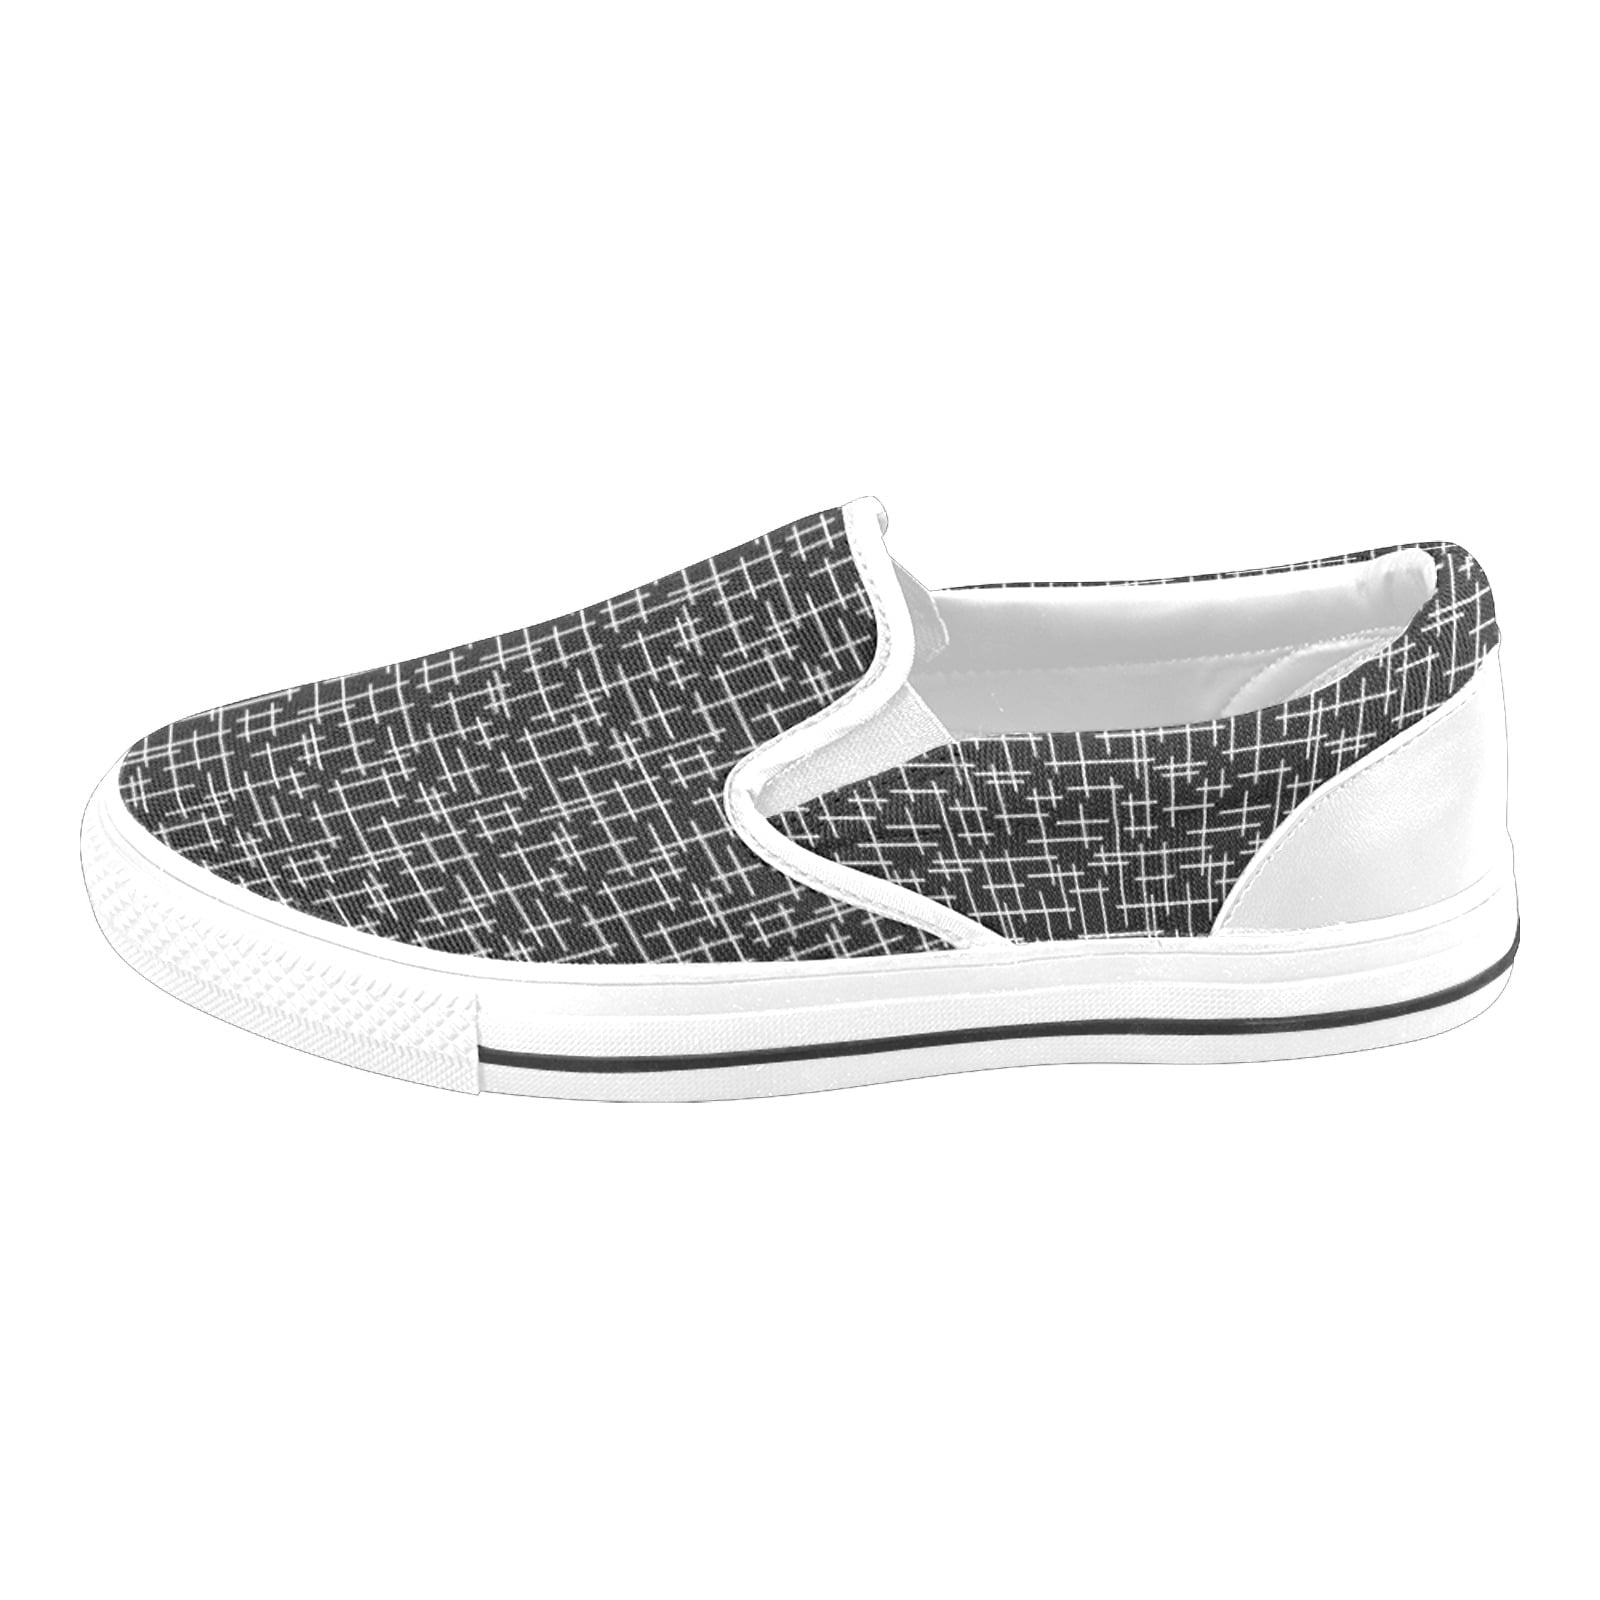 Mens Slip On Shoes Black and White =4 Women's Fashion Art Casual Canvas ...